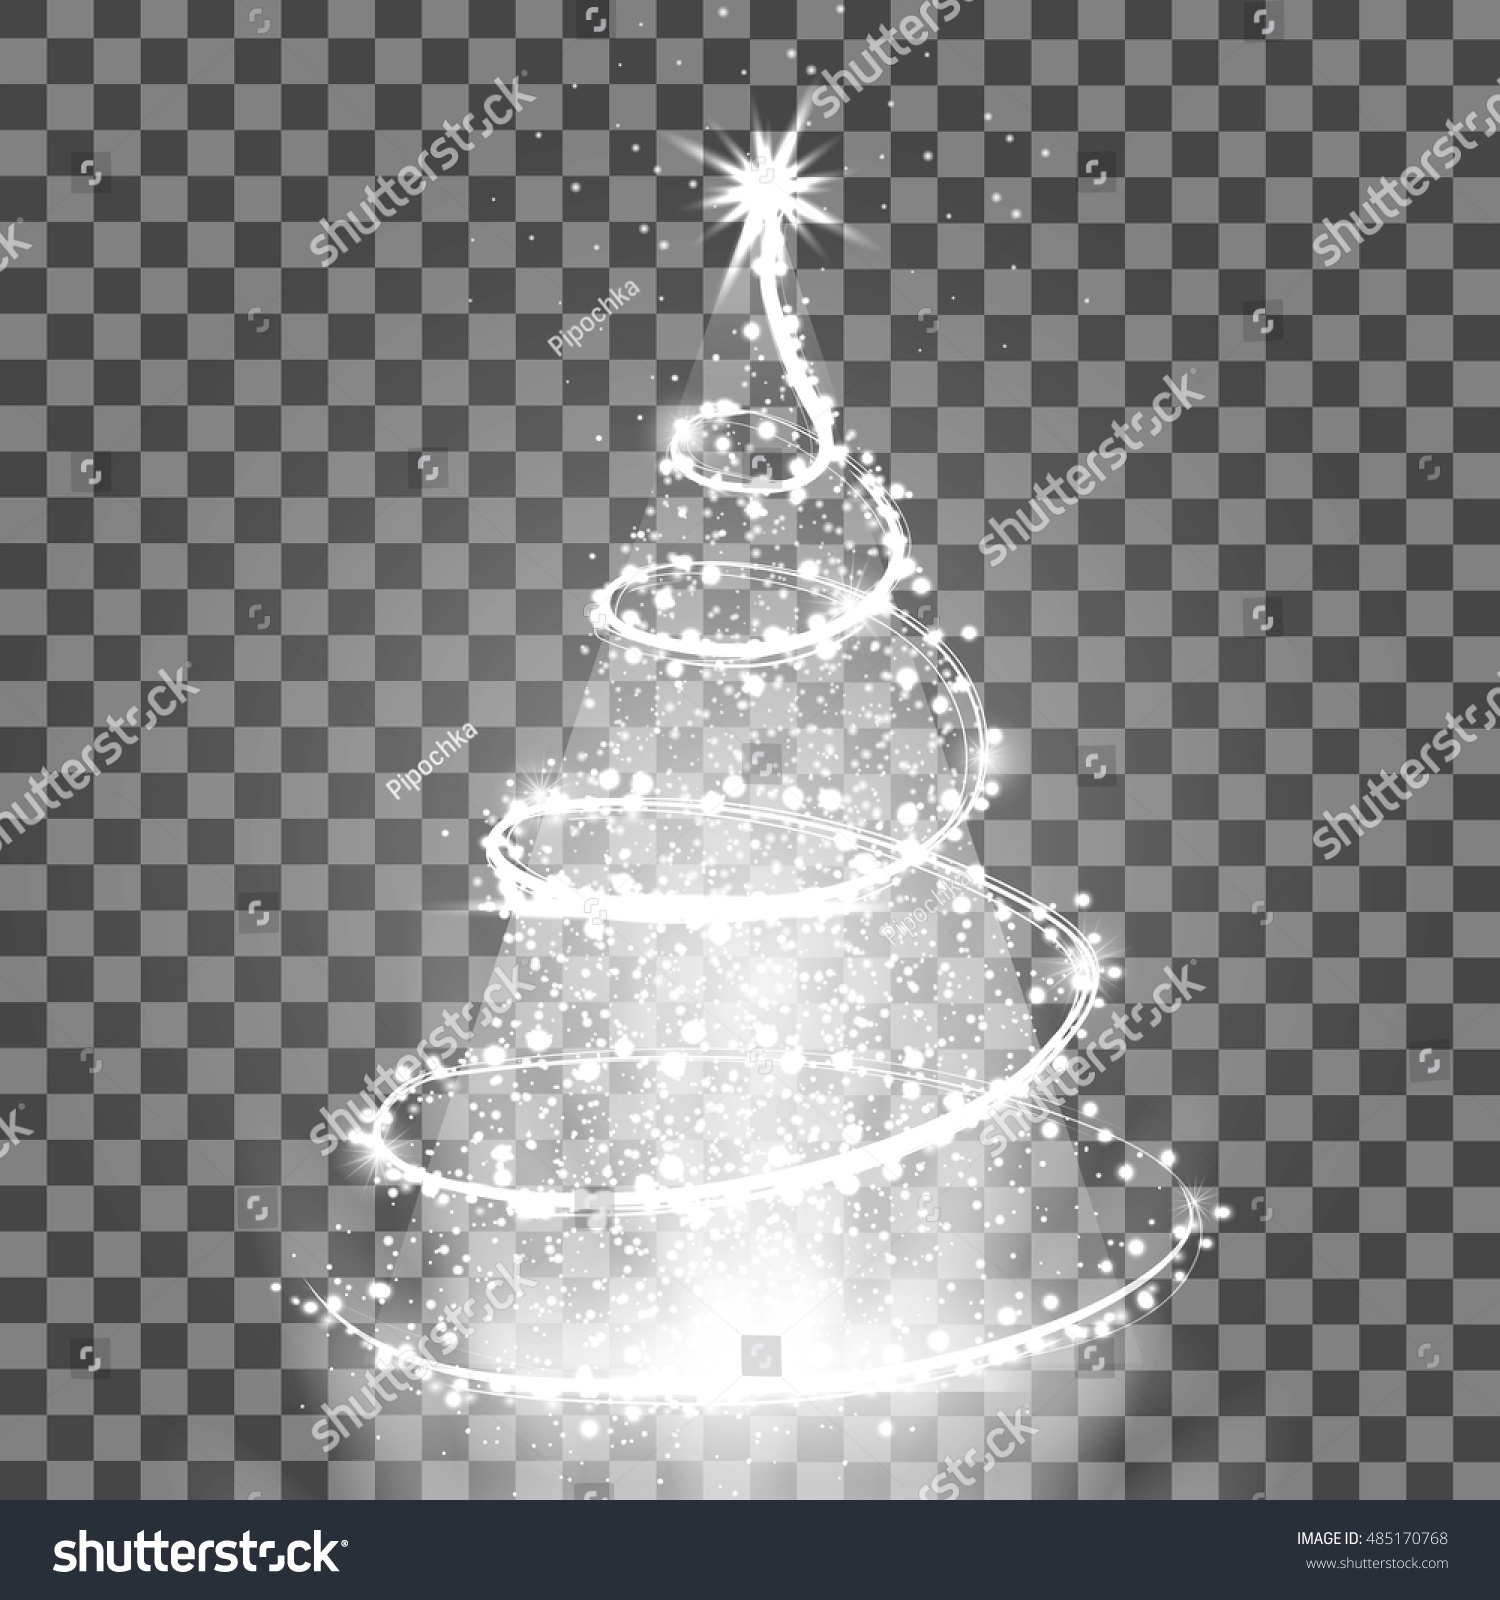 37,577 Christmas tree fireworks Images, Stock Photos & Vectors ...